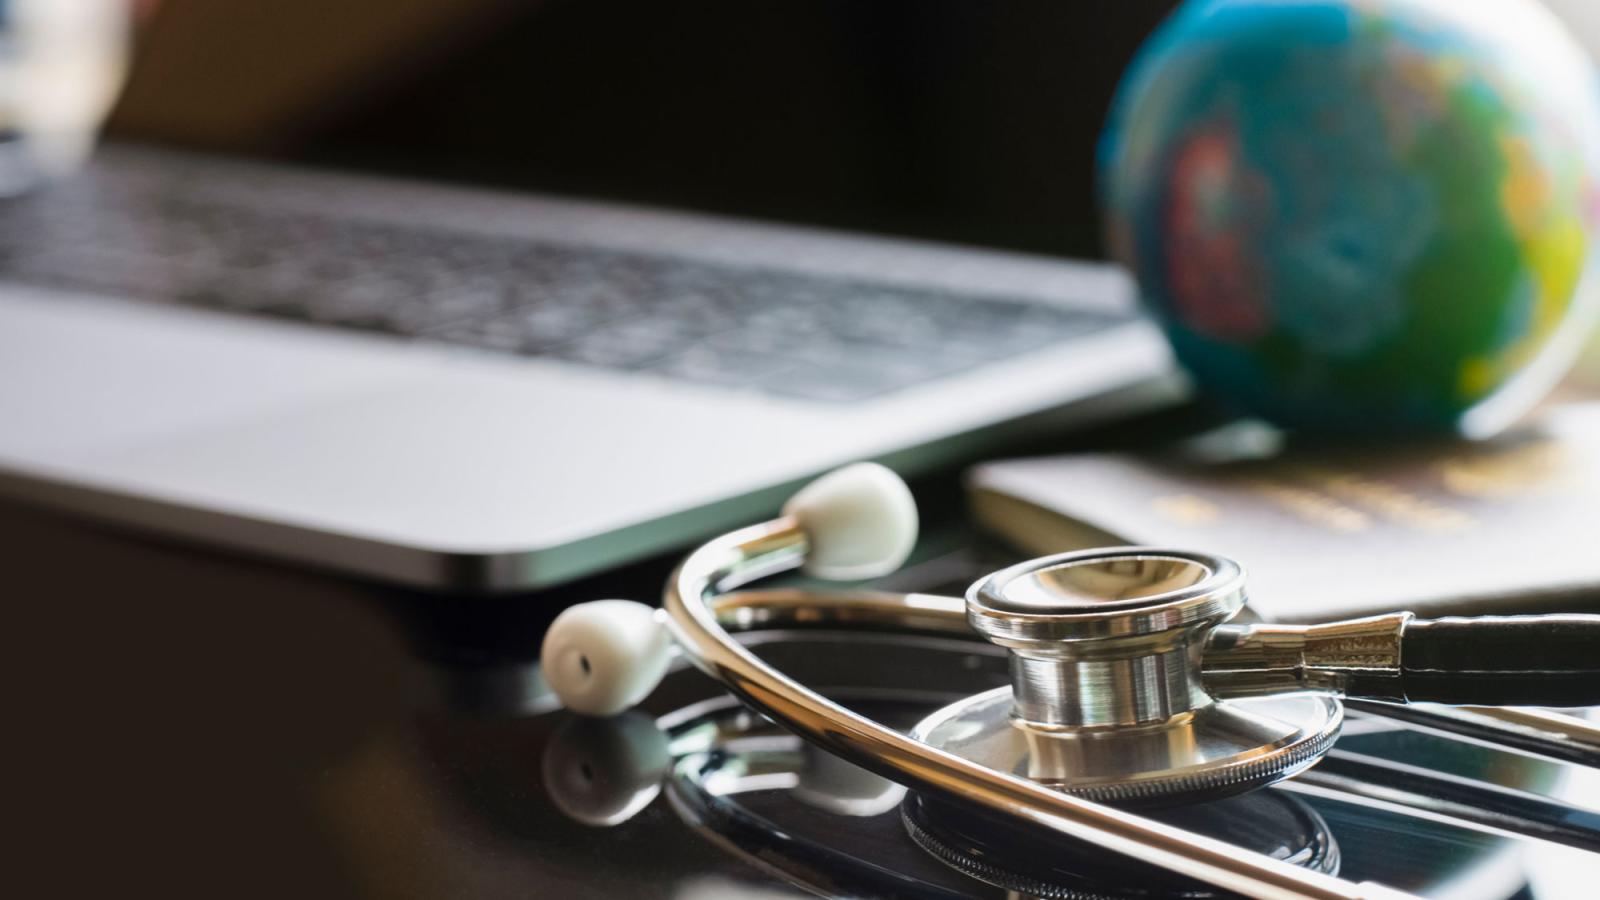 stethoscope and globe on a desk next to a laptop